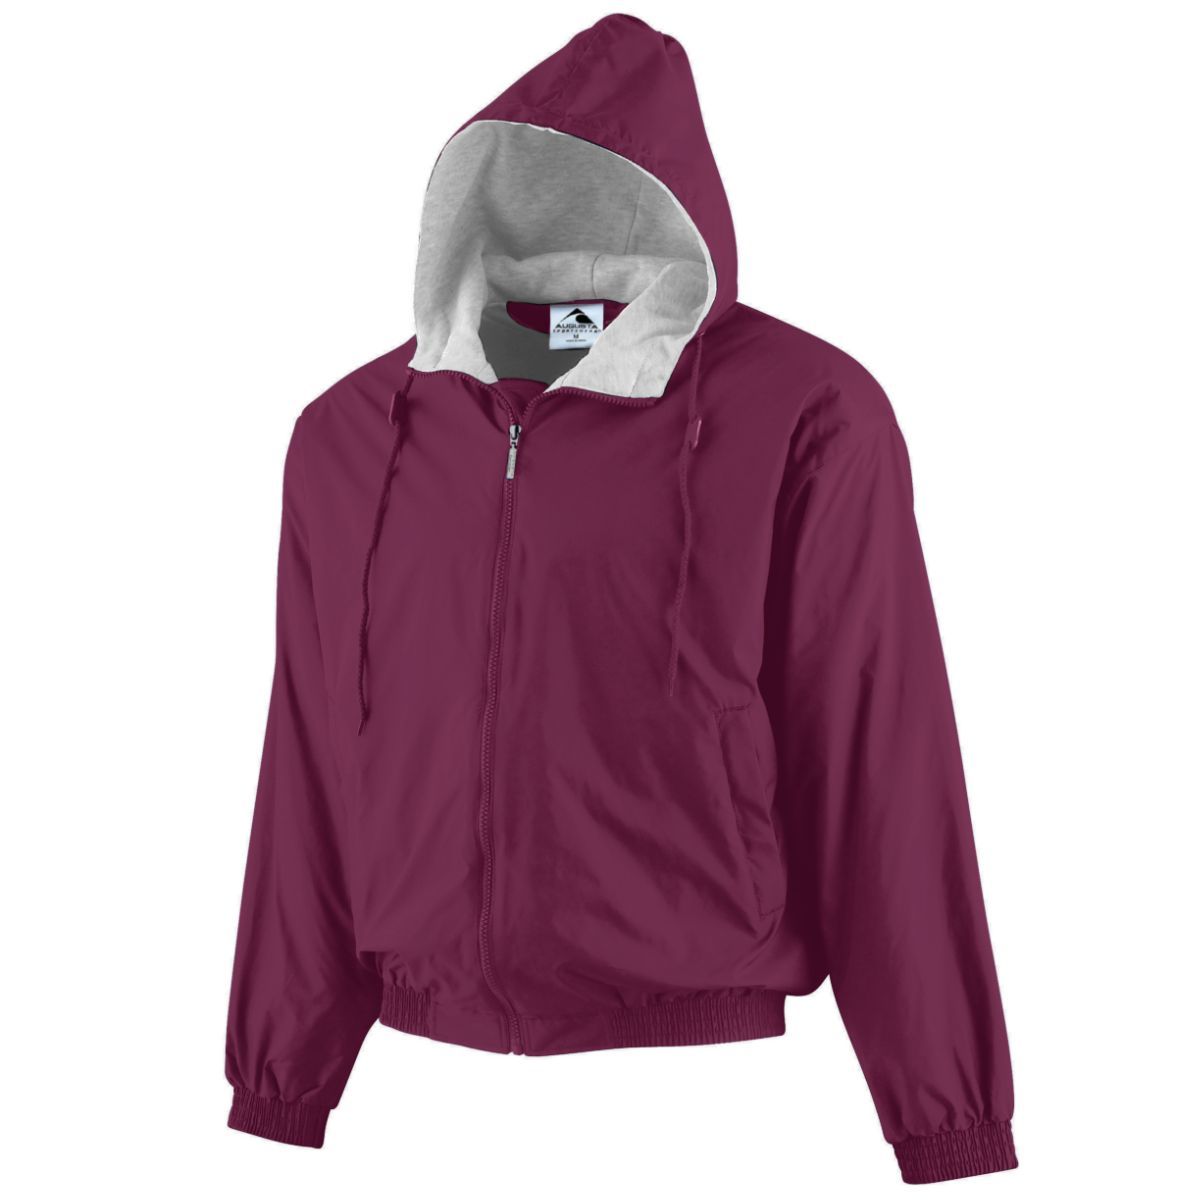 Augusta Sportswear Youth Hooded Taffeta Jacket/Fleece Lined in Maroon  -Part of the Youth, Youth-Jacket, Augusta-Products, Outerwear product lines at KanaleyCreations.com